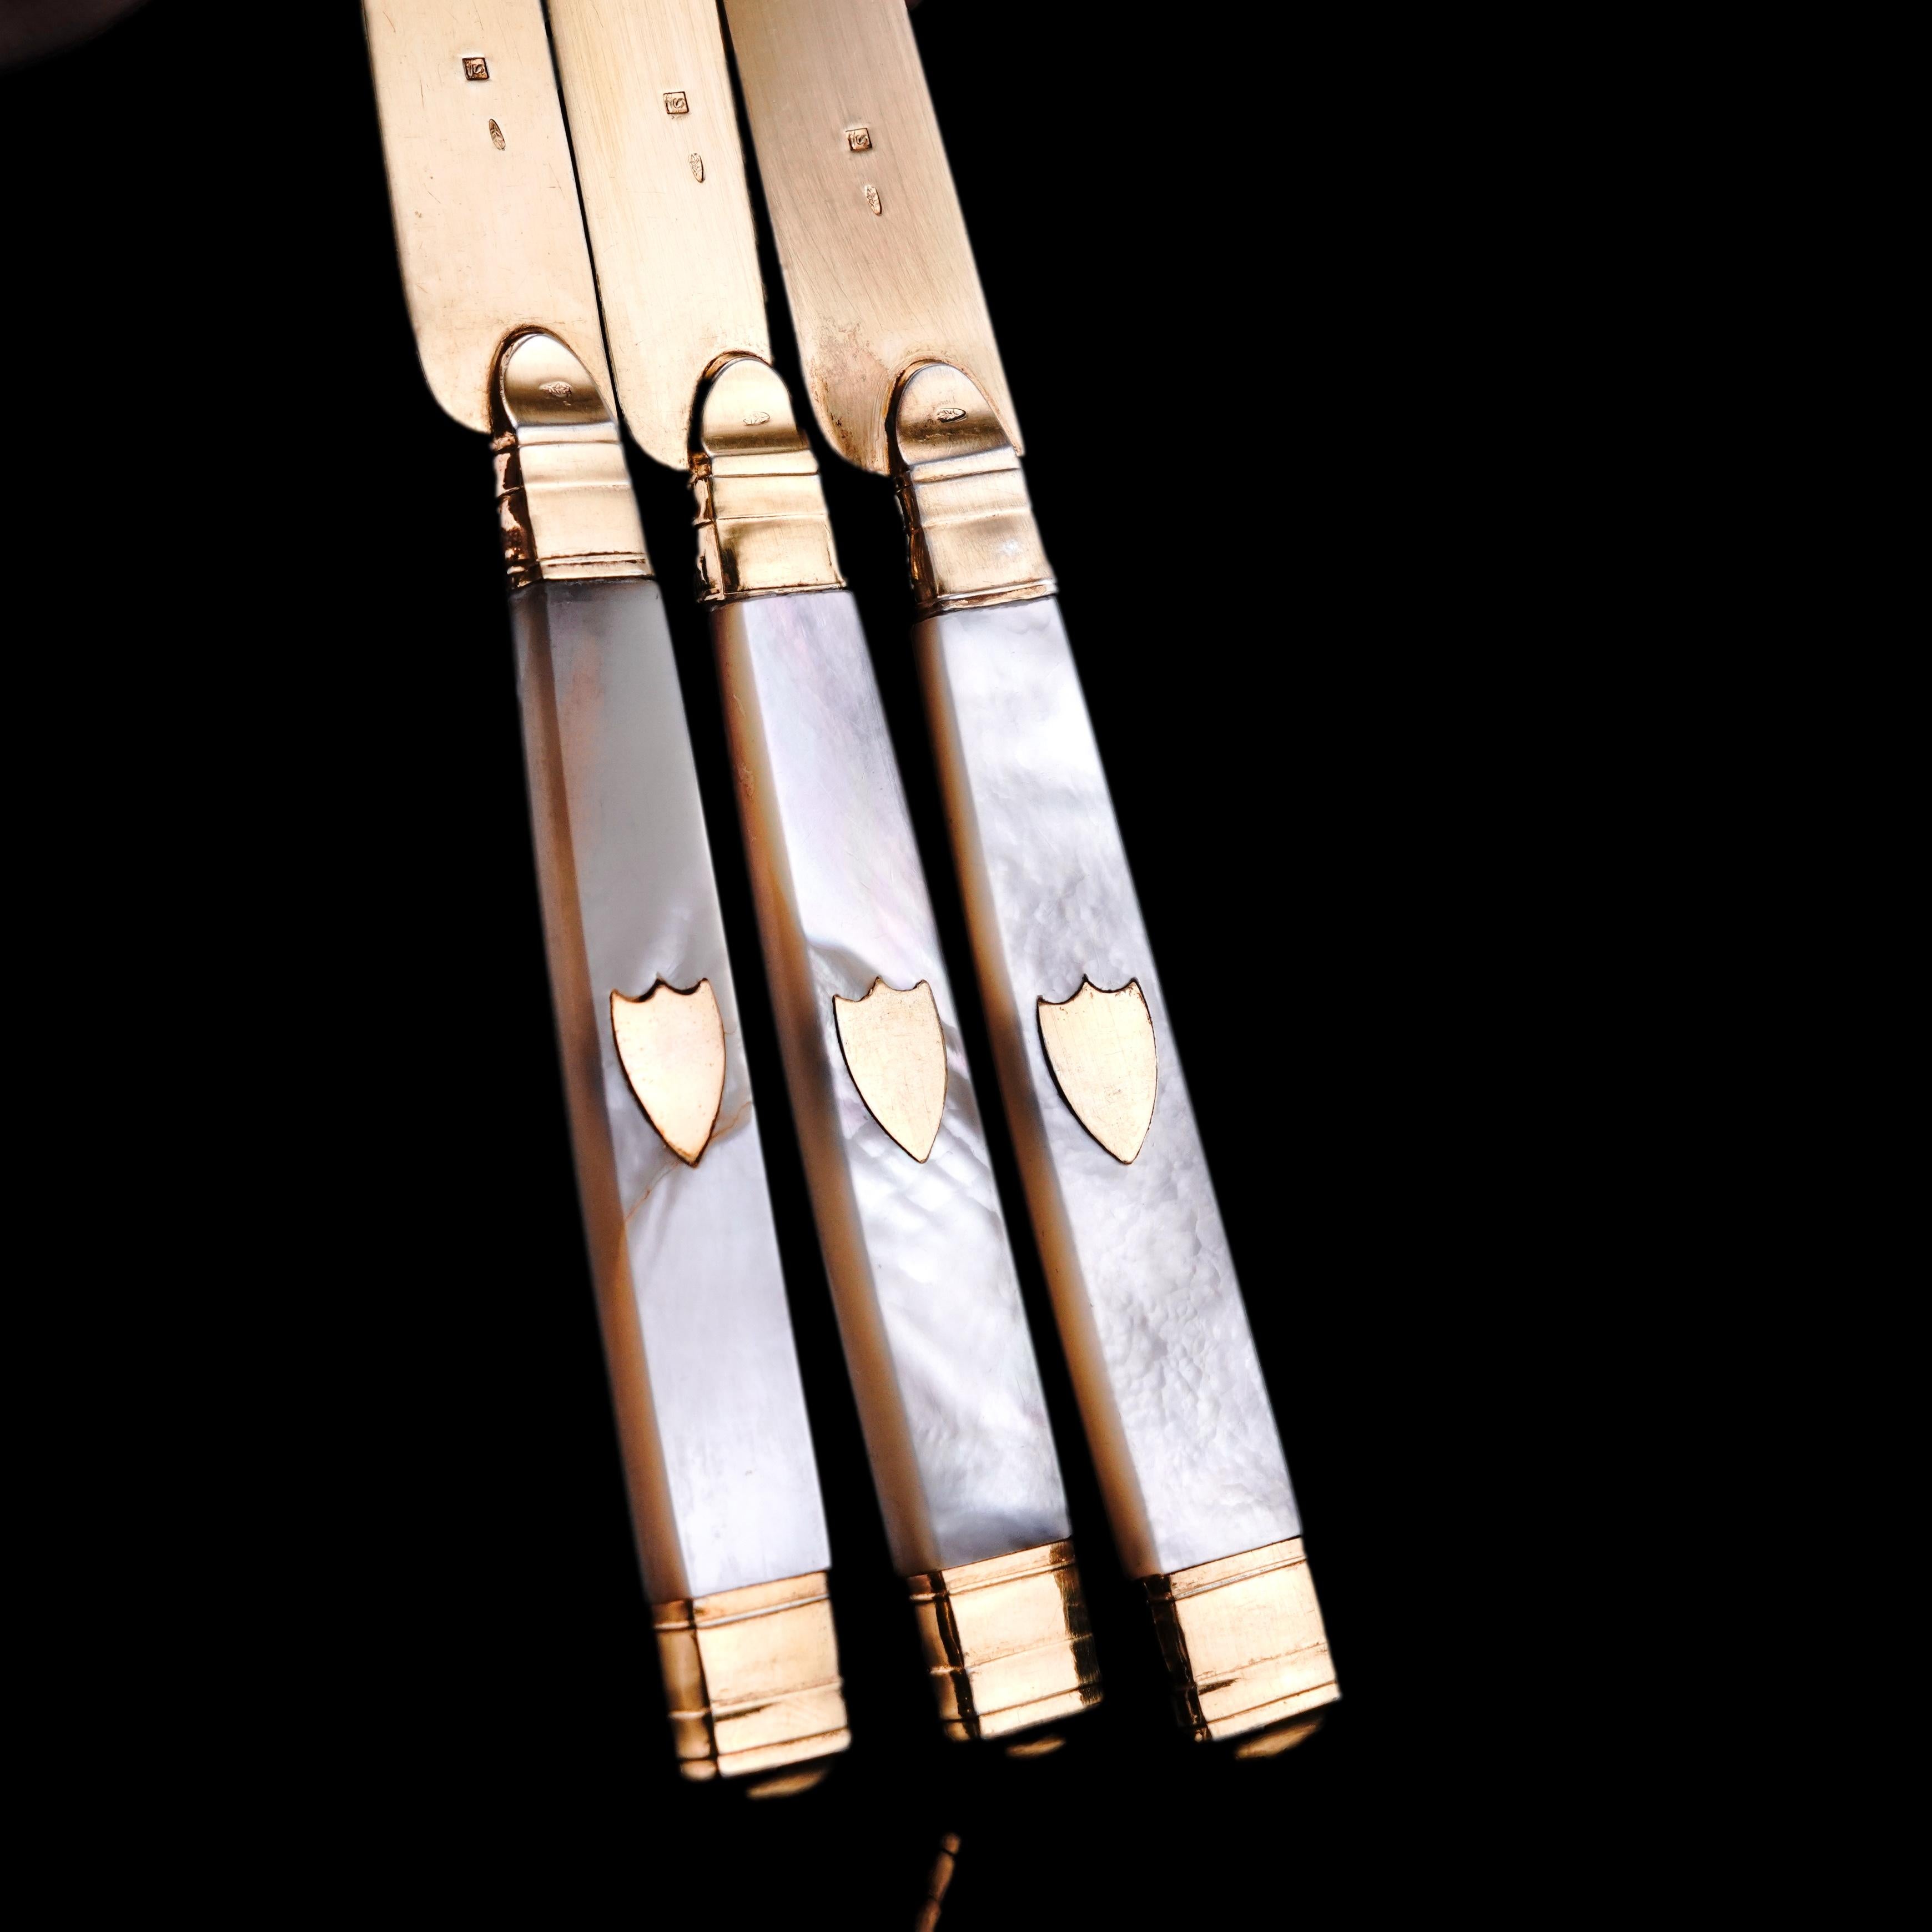 Antique Solid Silver Gilt Mother of Pearl Knives Set of 6 - 19th C. Dutch For Sale 10